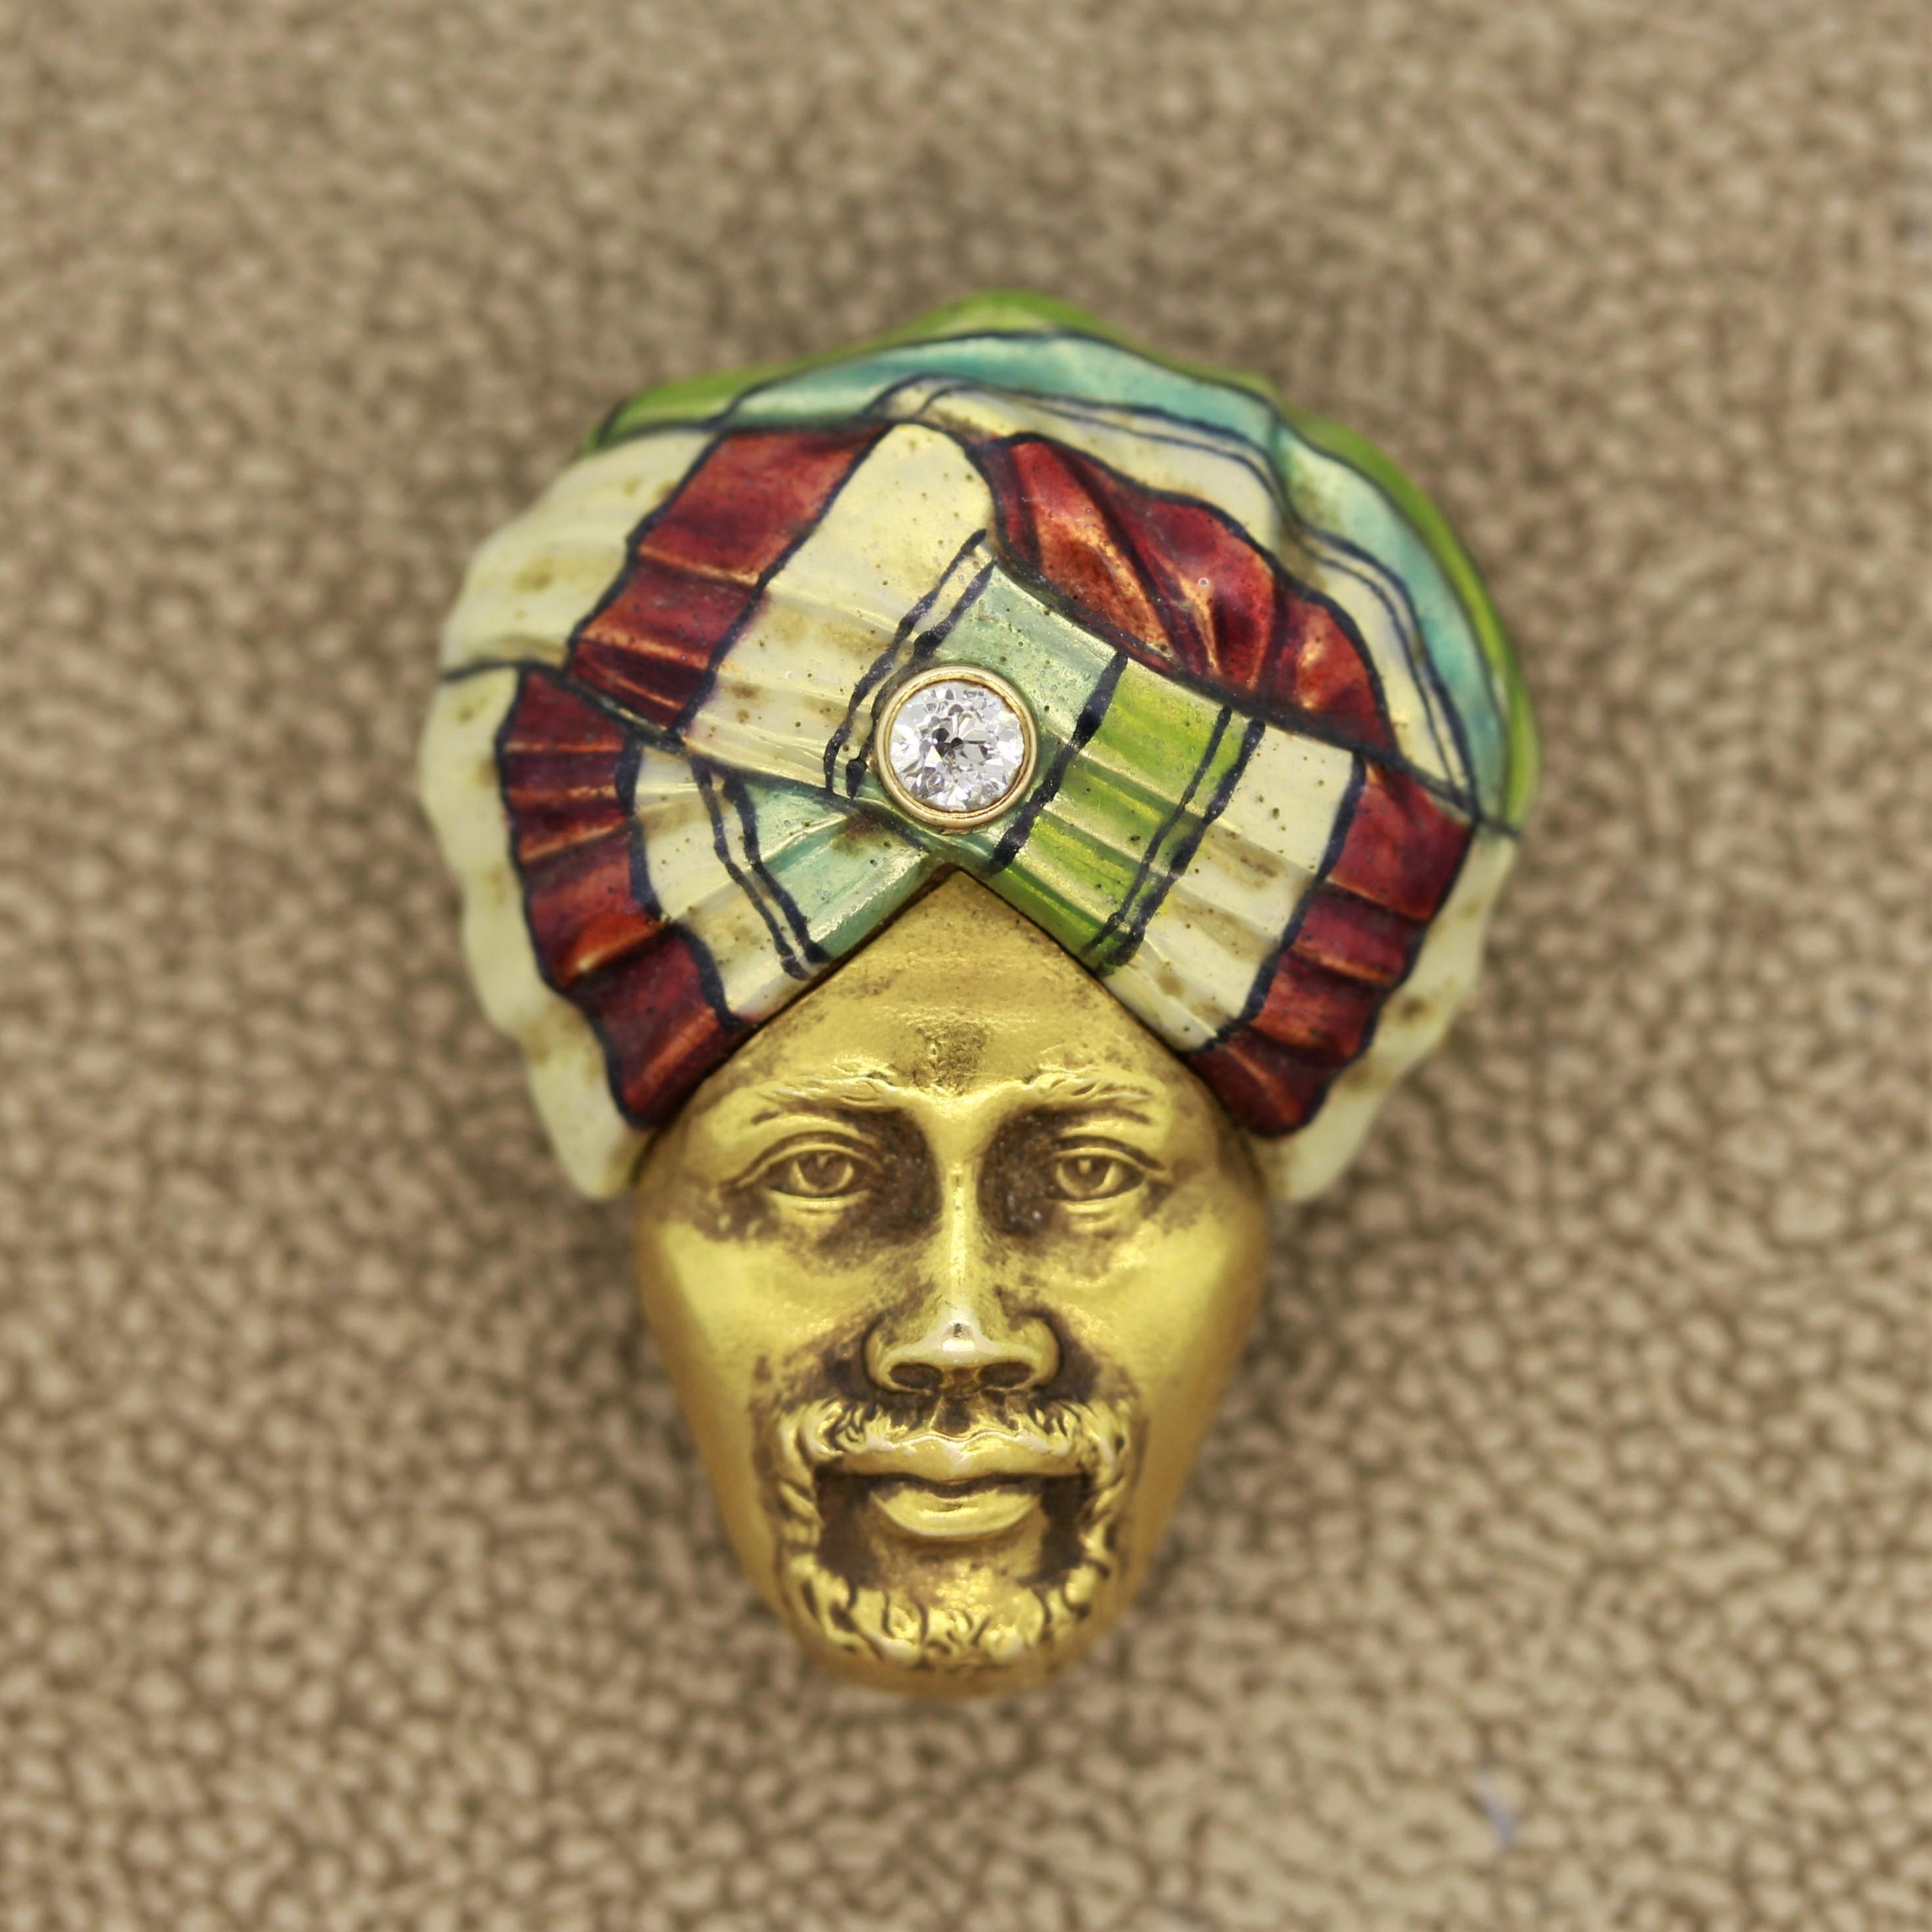 A fantastically designed piece from the turn of the 20th century. It features a dignified man with a bright enamel turban with a round European cut diamond set in it. Hand made in 14k yellow gold, this treasure will make a great addition or any